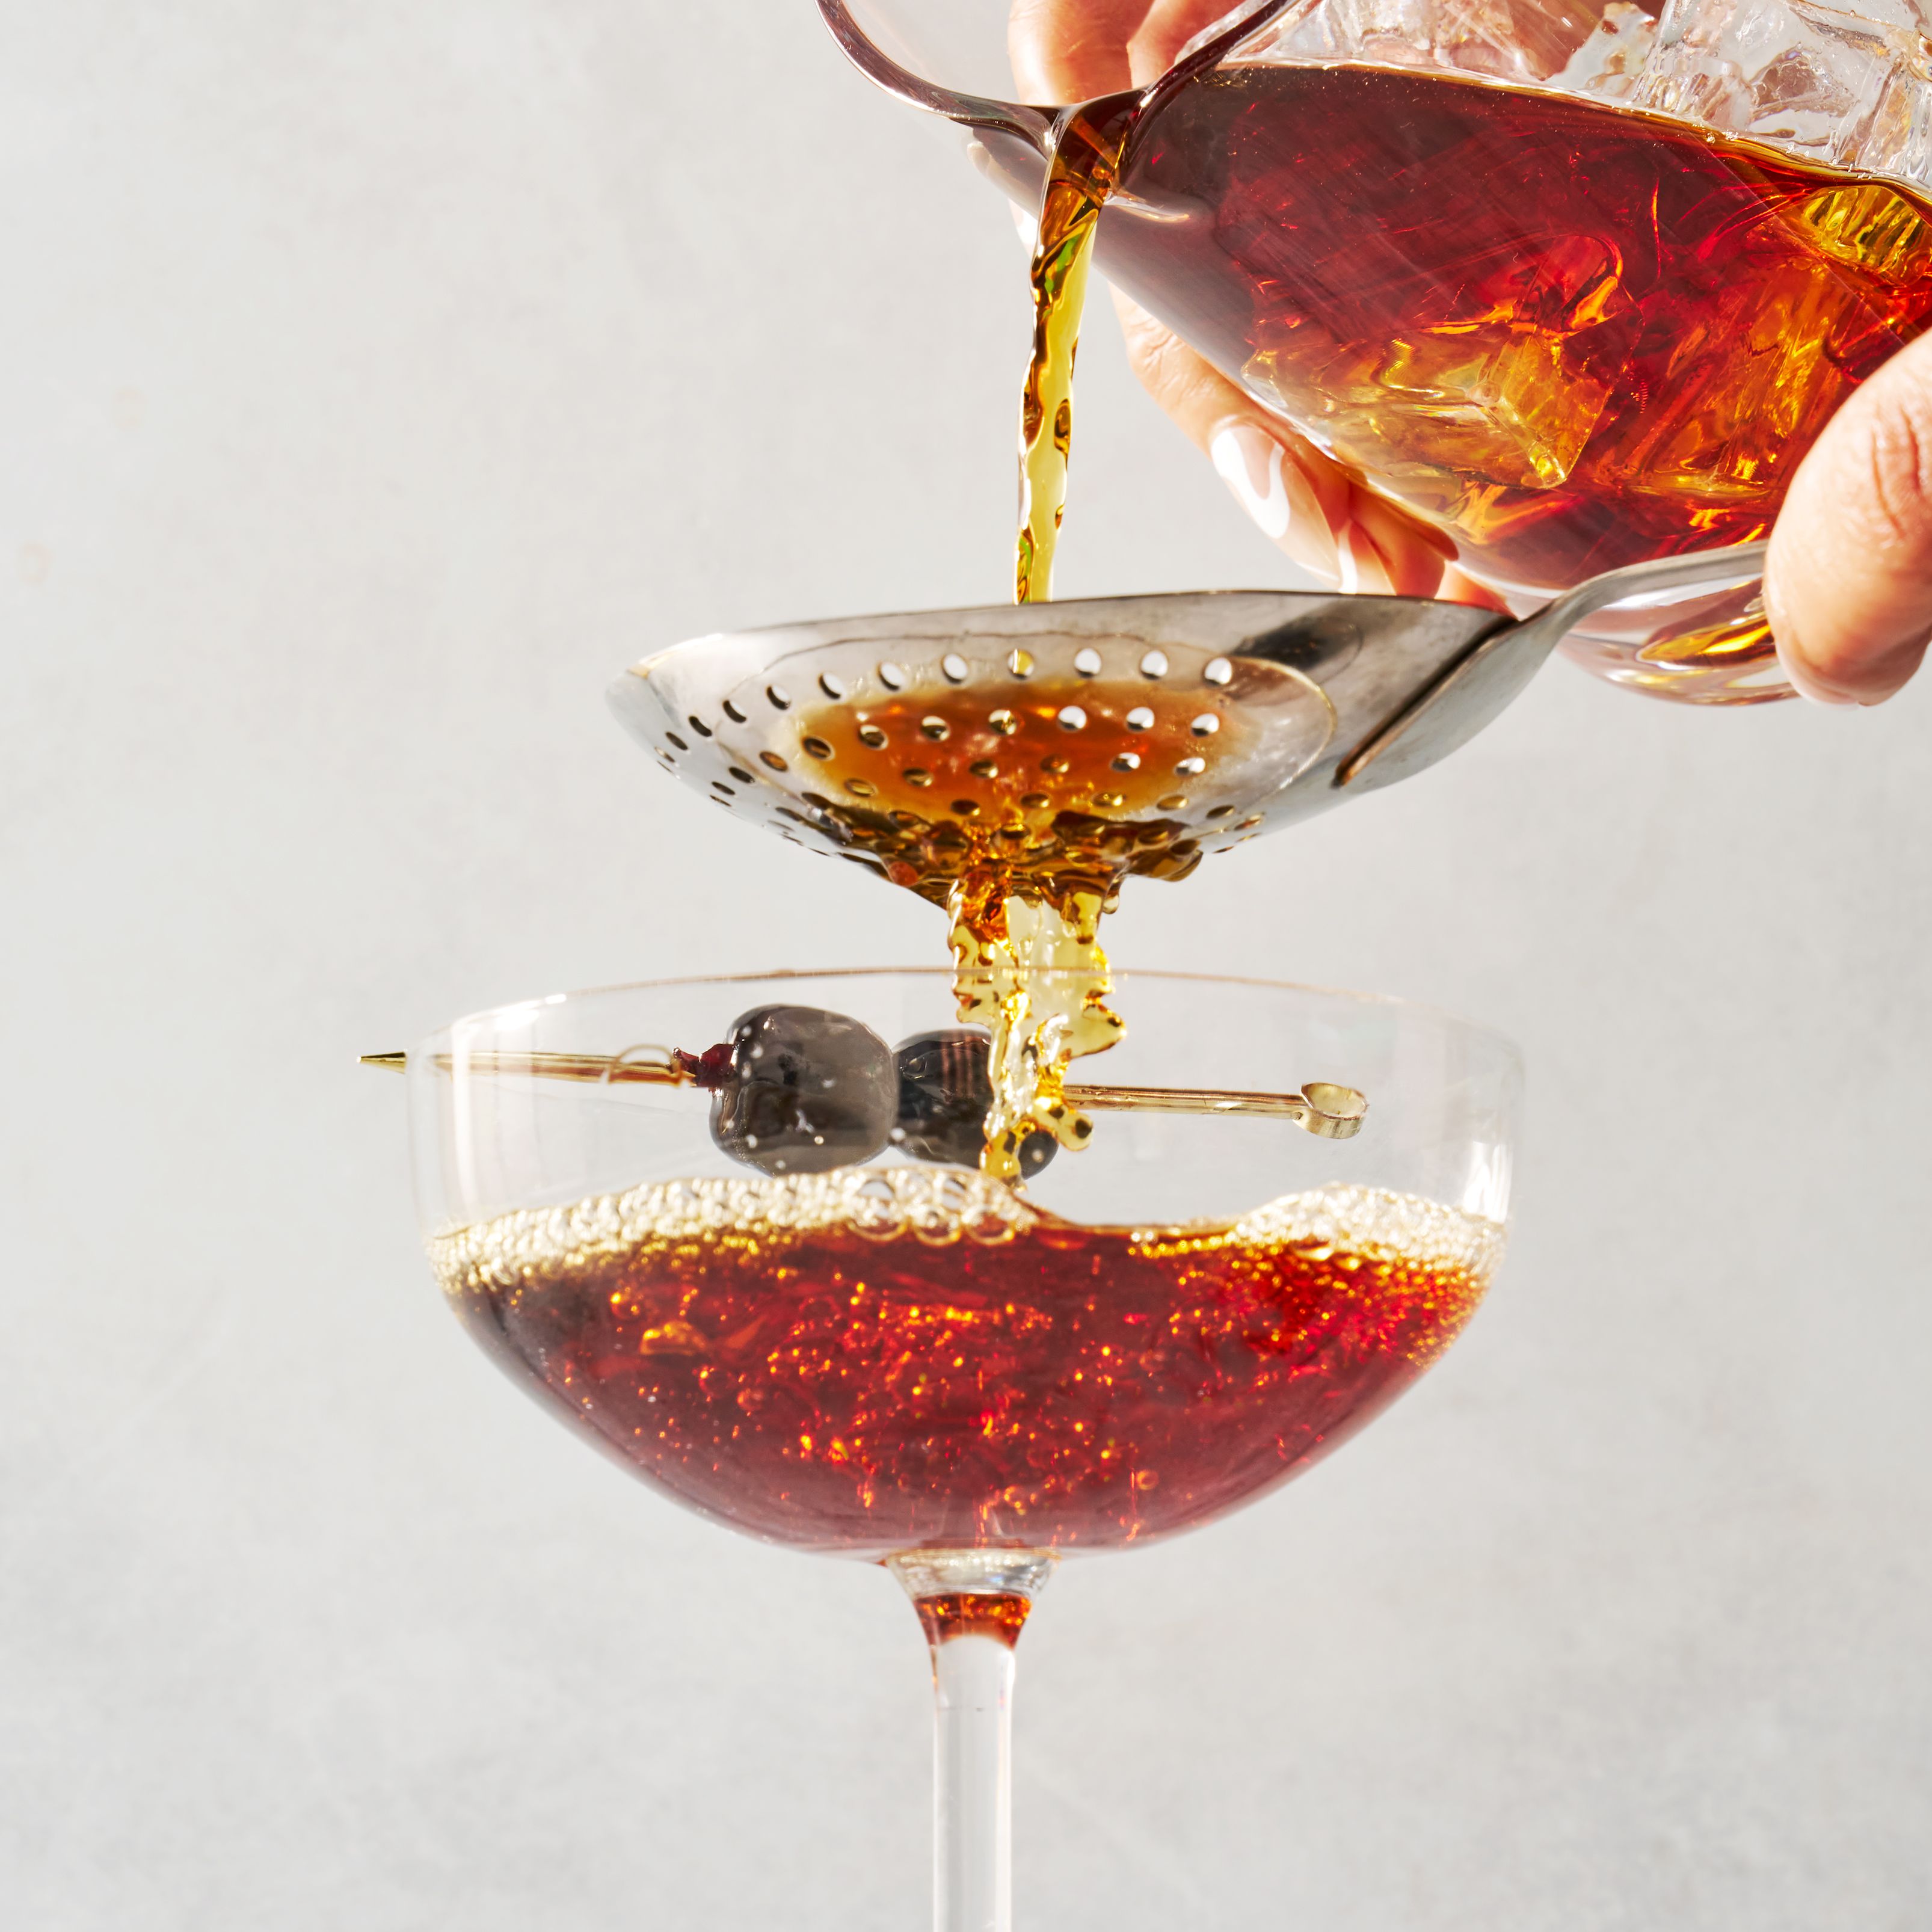 The Dos and Don'ts of Making a Manhattan